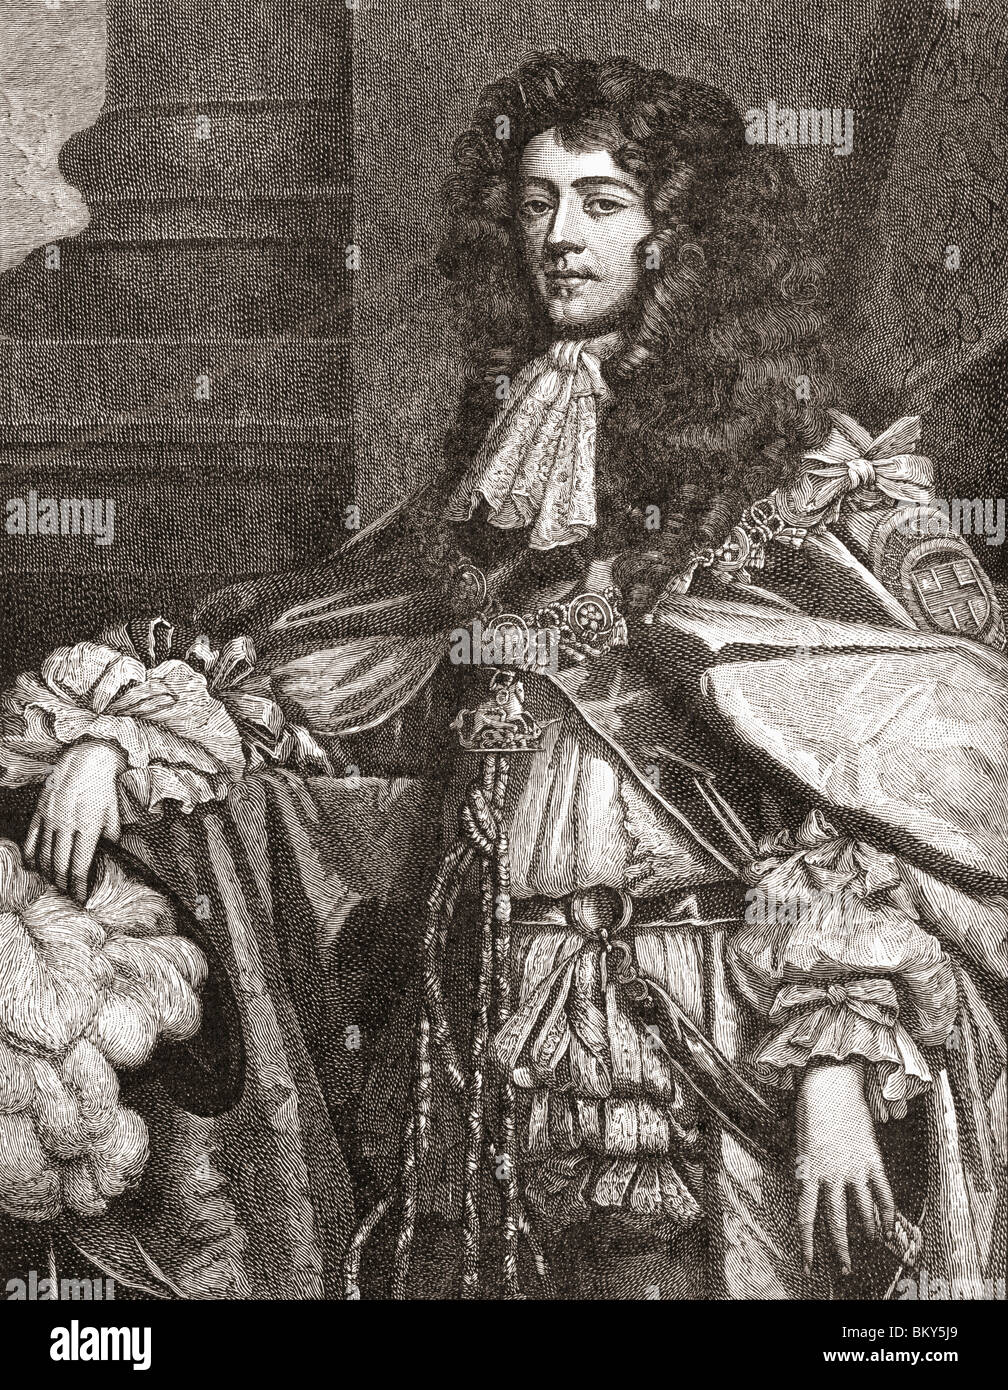 James Crofts or James Fitzroy, later Sir James Scott, 1st Duke of Monmouth, 1st Duke of Buccleuch, 1649 to 1685. Dutch-born English nobleman and military officer. Stock Photo